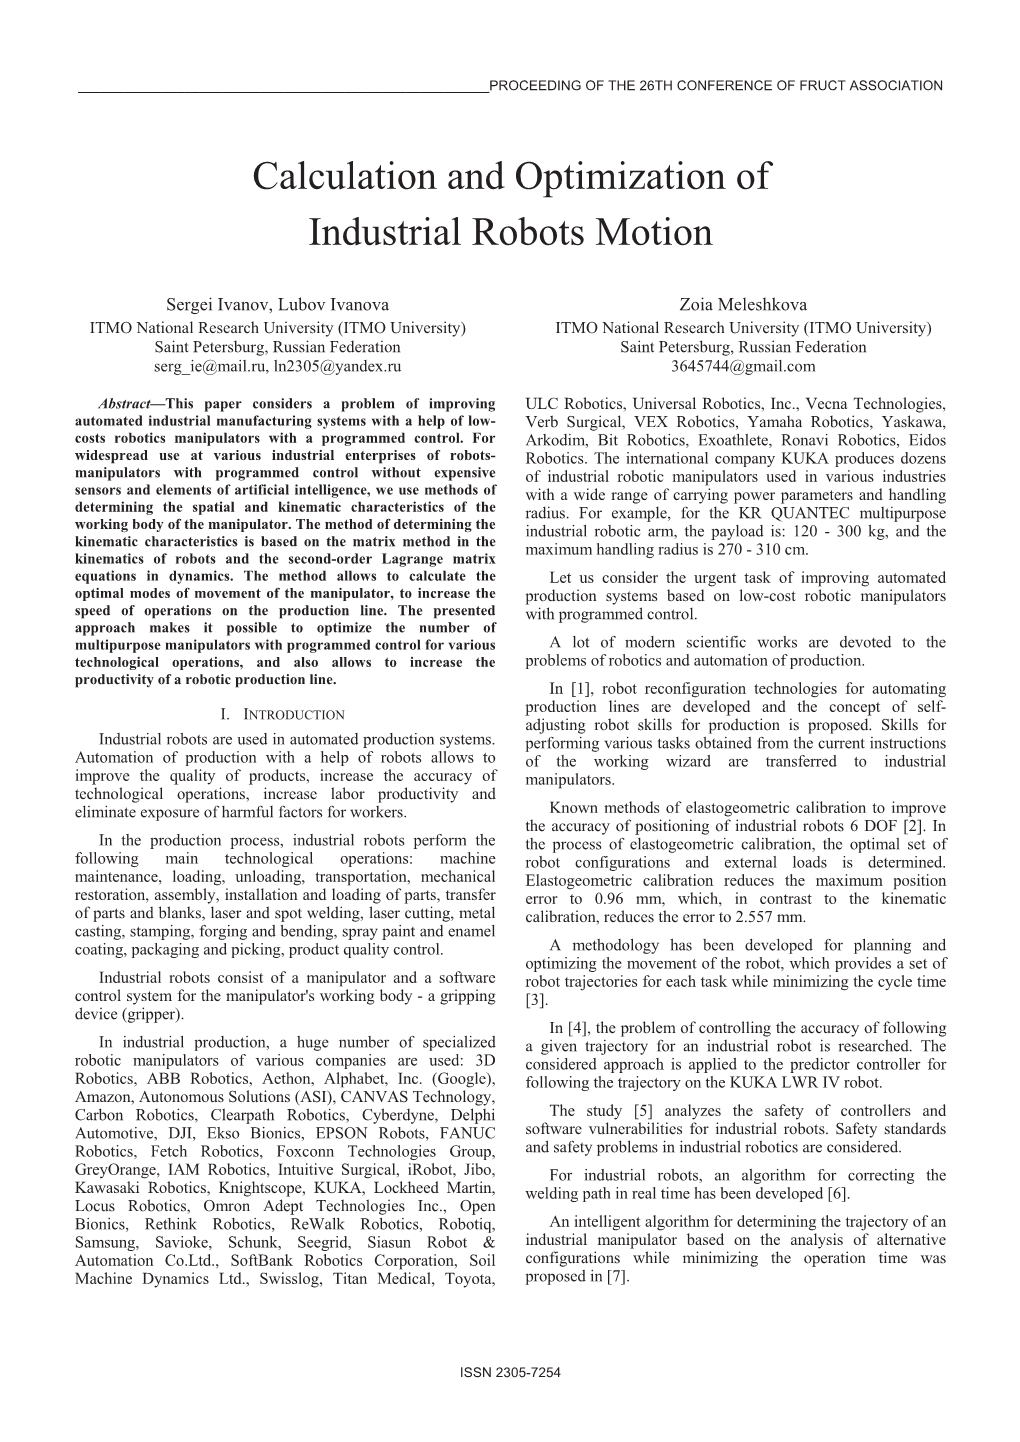 Calculation and Optimization of Industrial Robots Motion